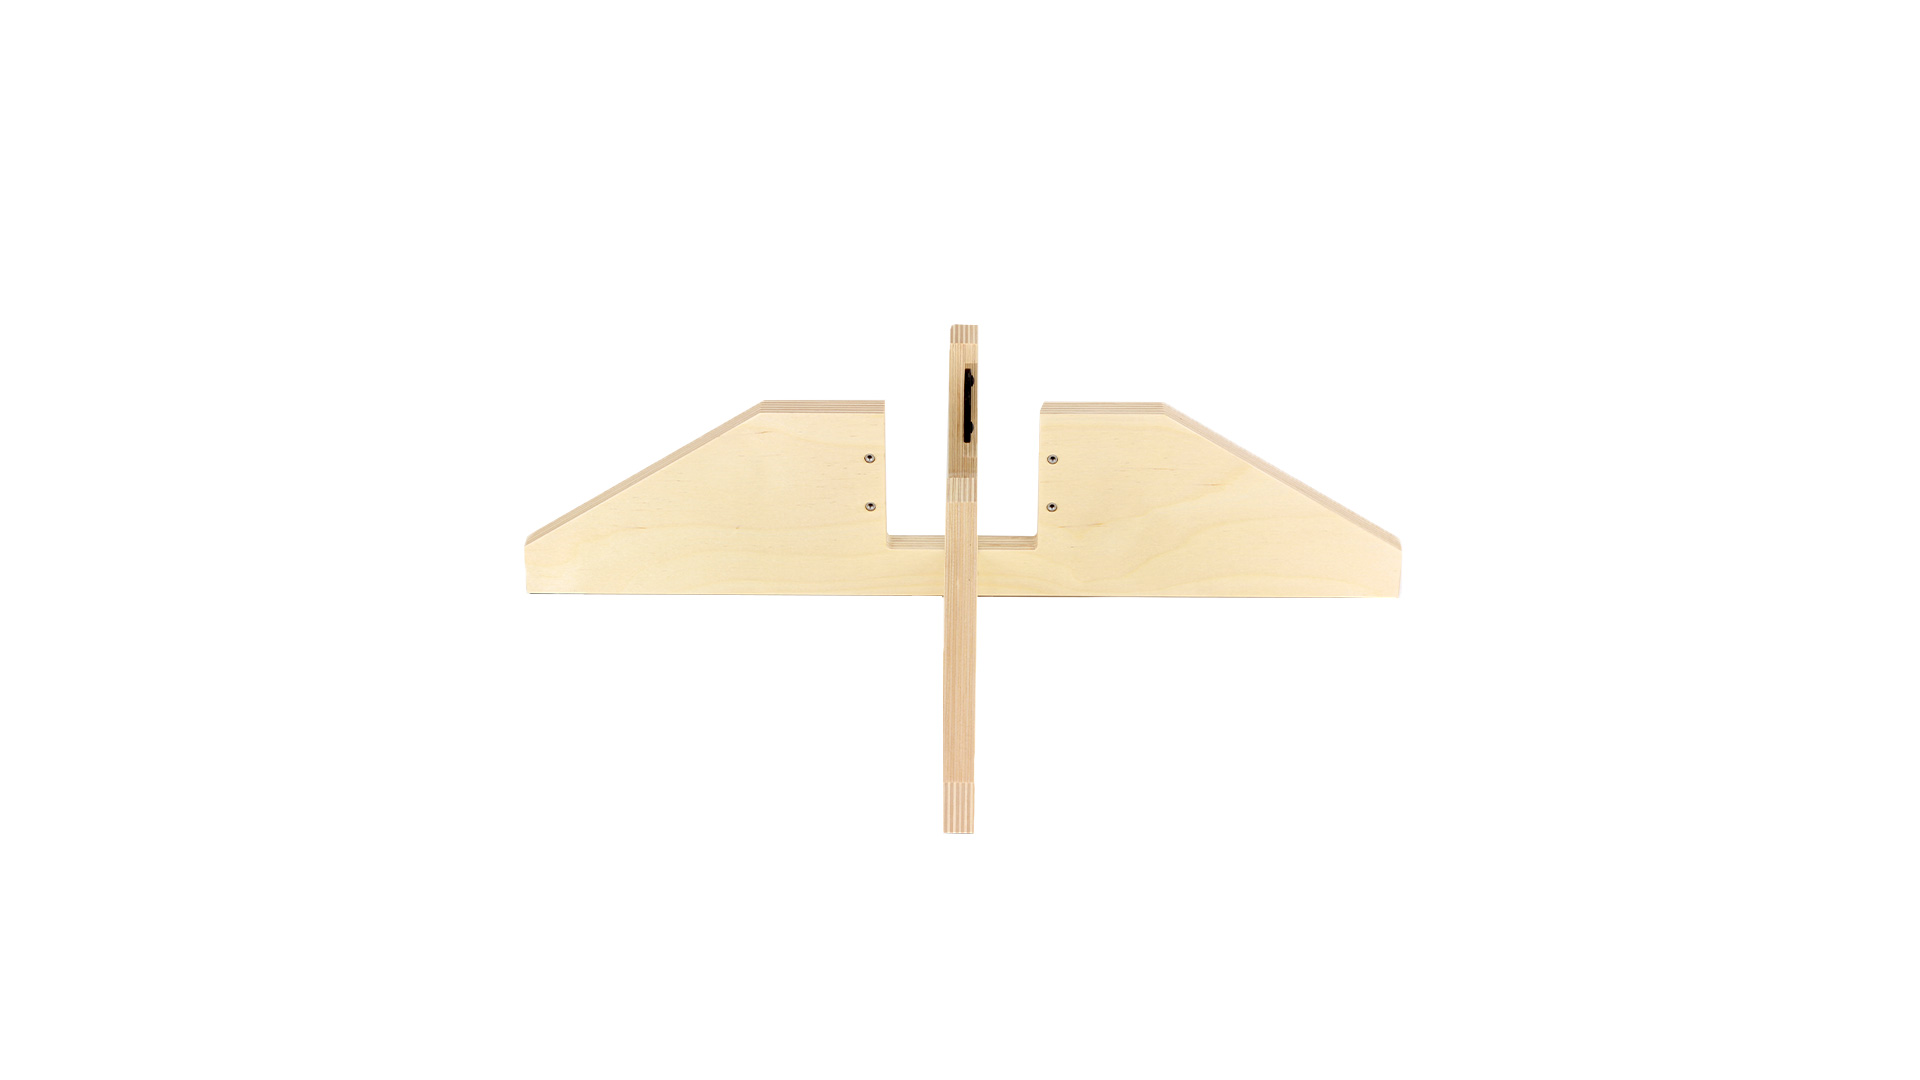 Paetzold by Kunath, head-cross stand for sub great bass, natural finish, birch plywood